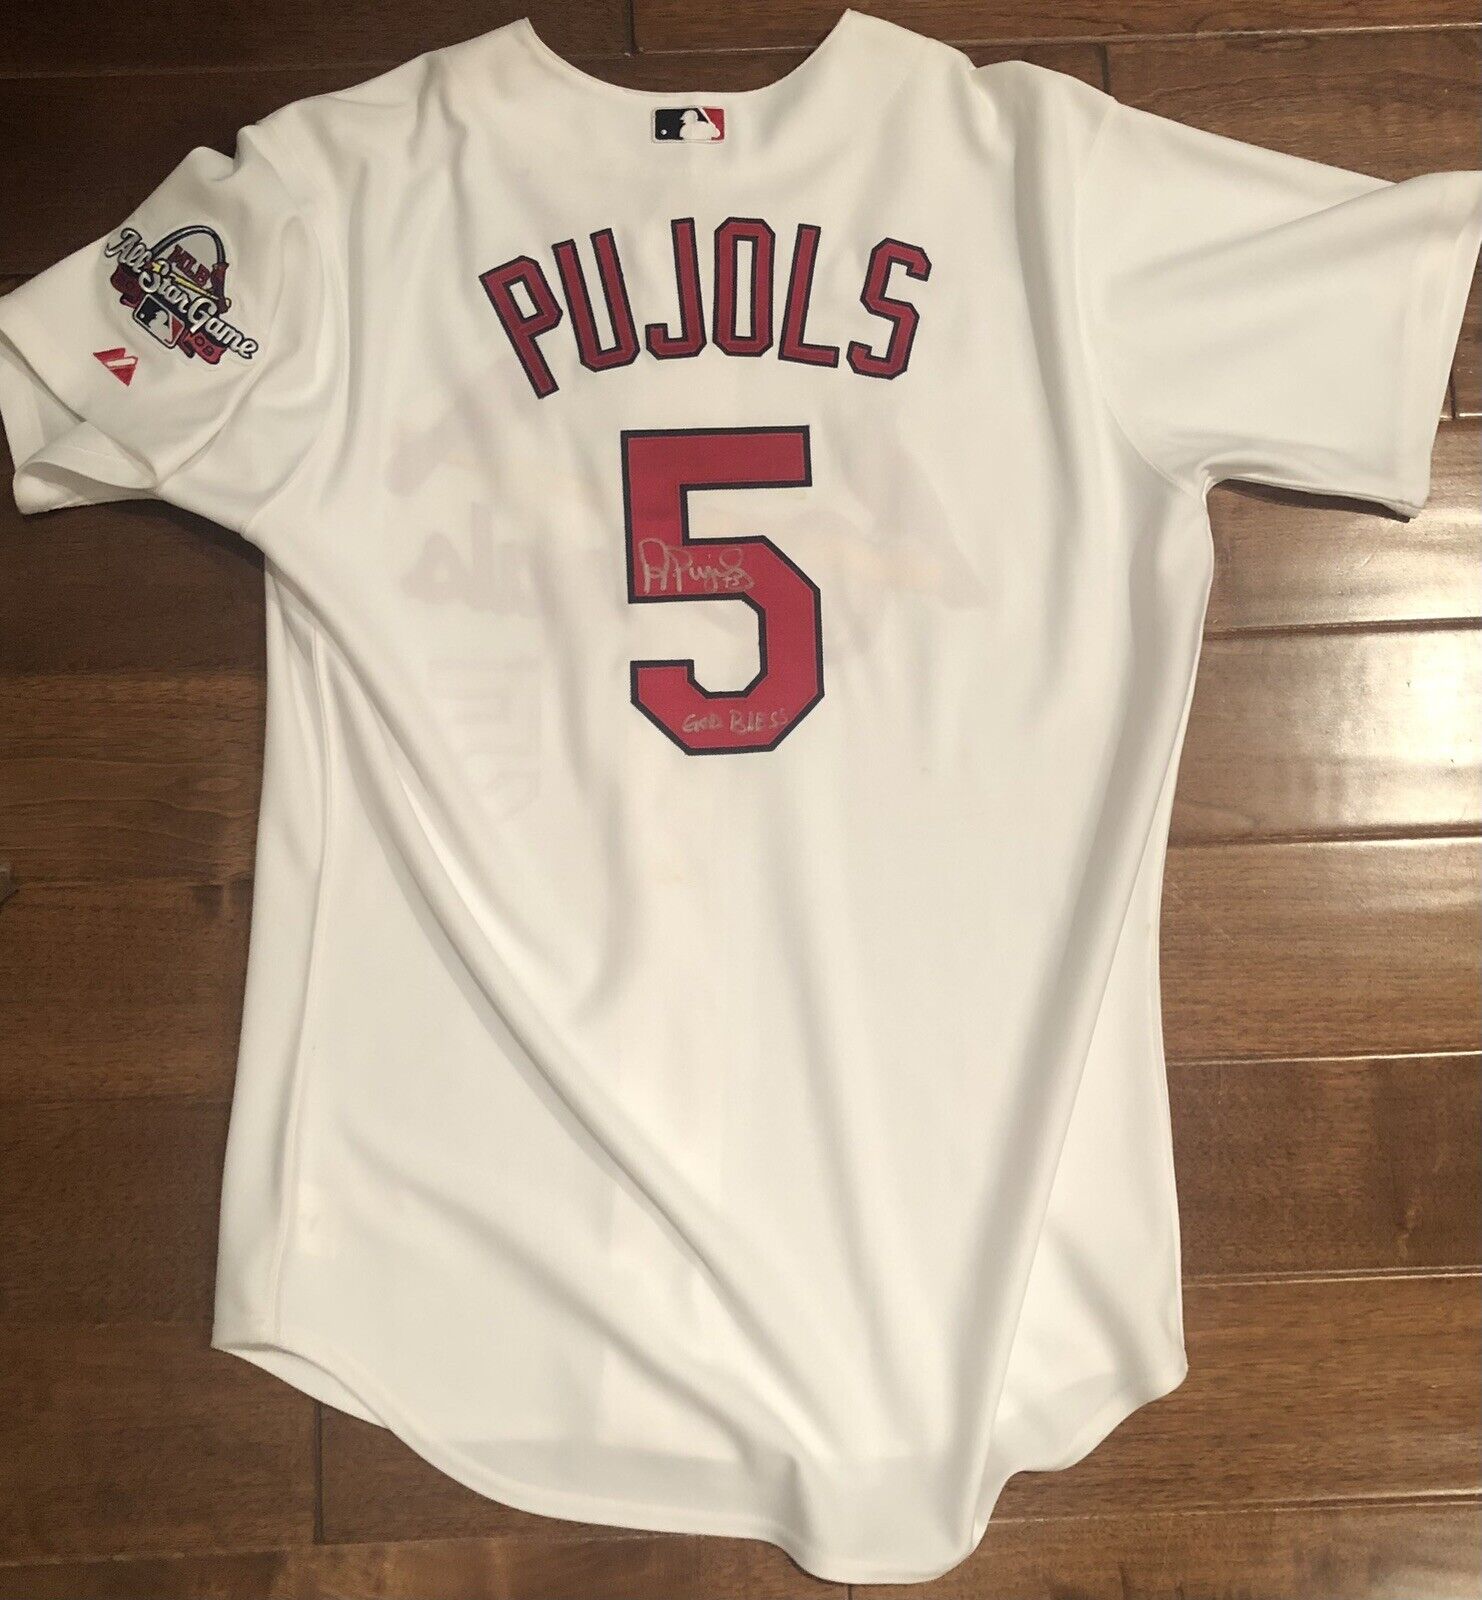 2009 All Star SIGNED Albert Pujols JERSEY Cardinals Authentic proof